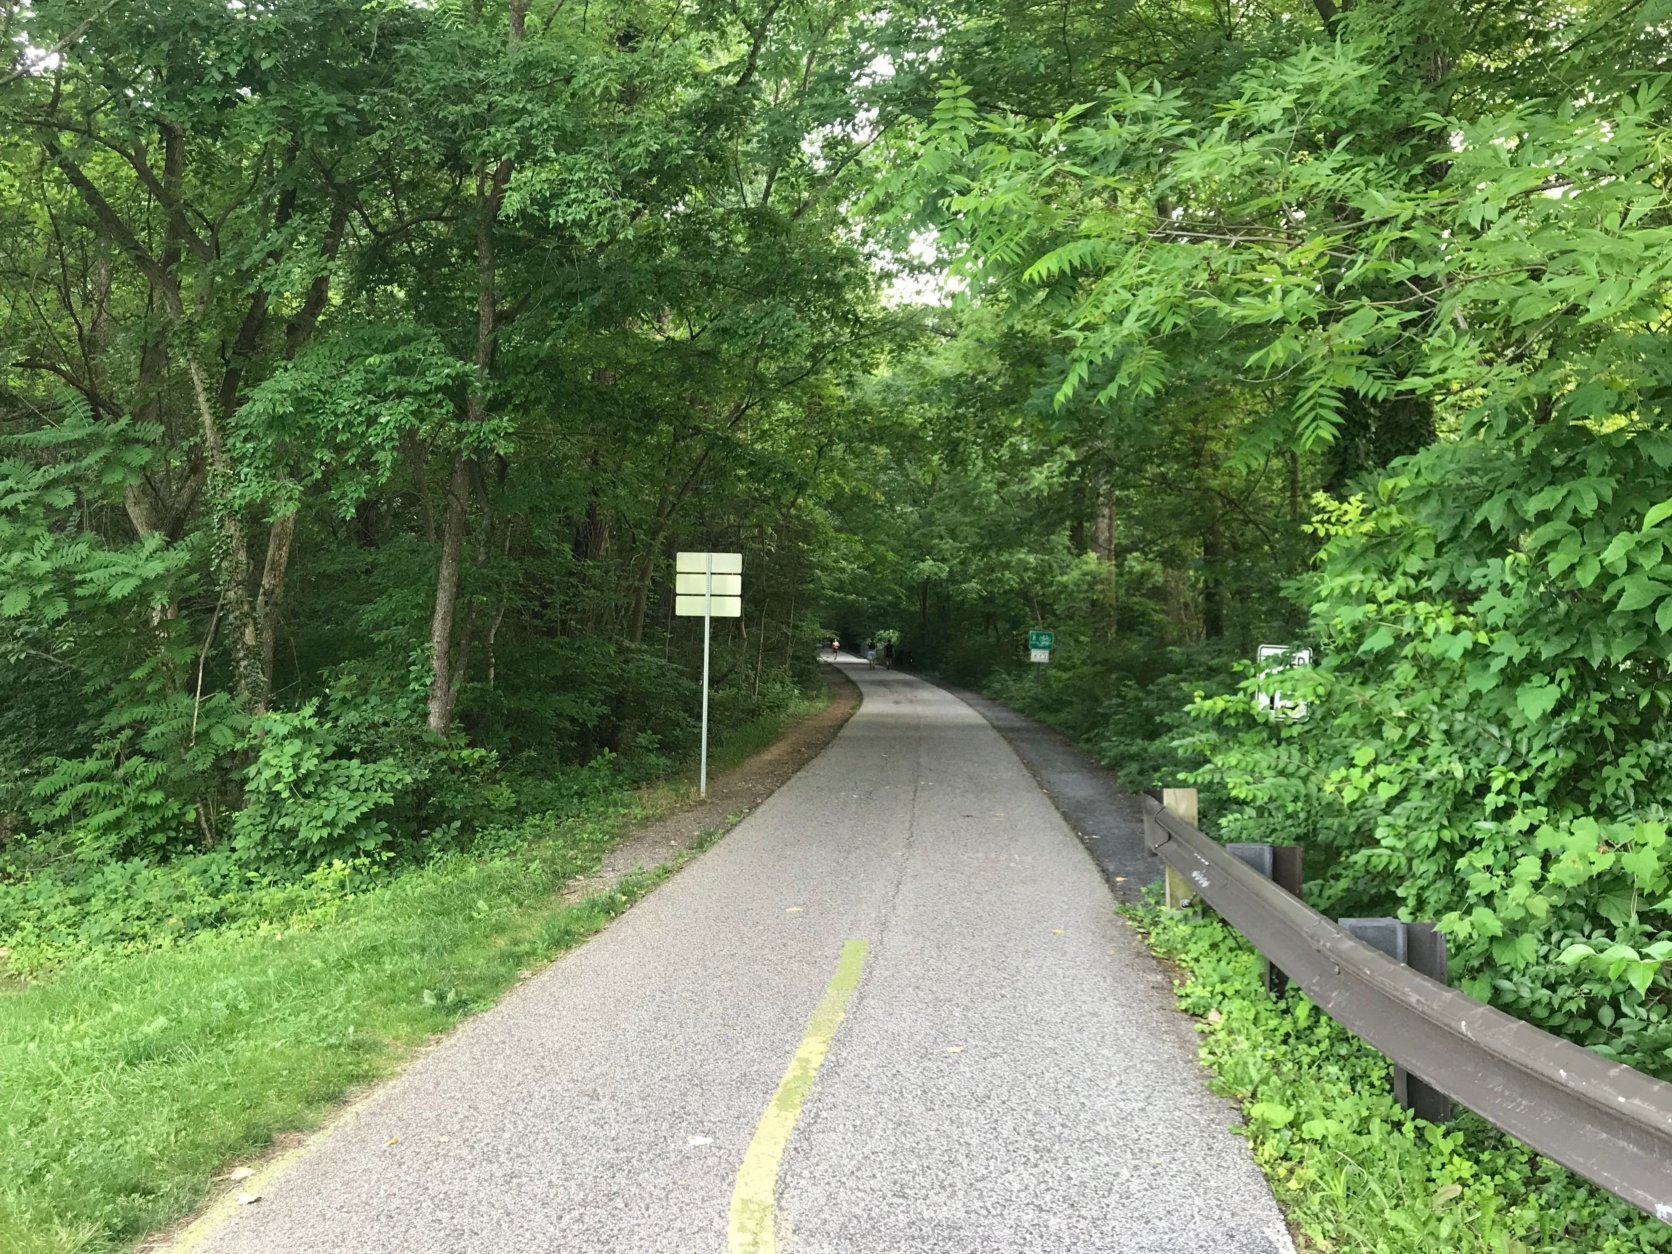 Montgomery County is developing plans aimed at boosting safety on the Capital Crescent Trail  where it crosses Little Falls Parkway in Bethesda. (WTOP/Dick Uliano)